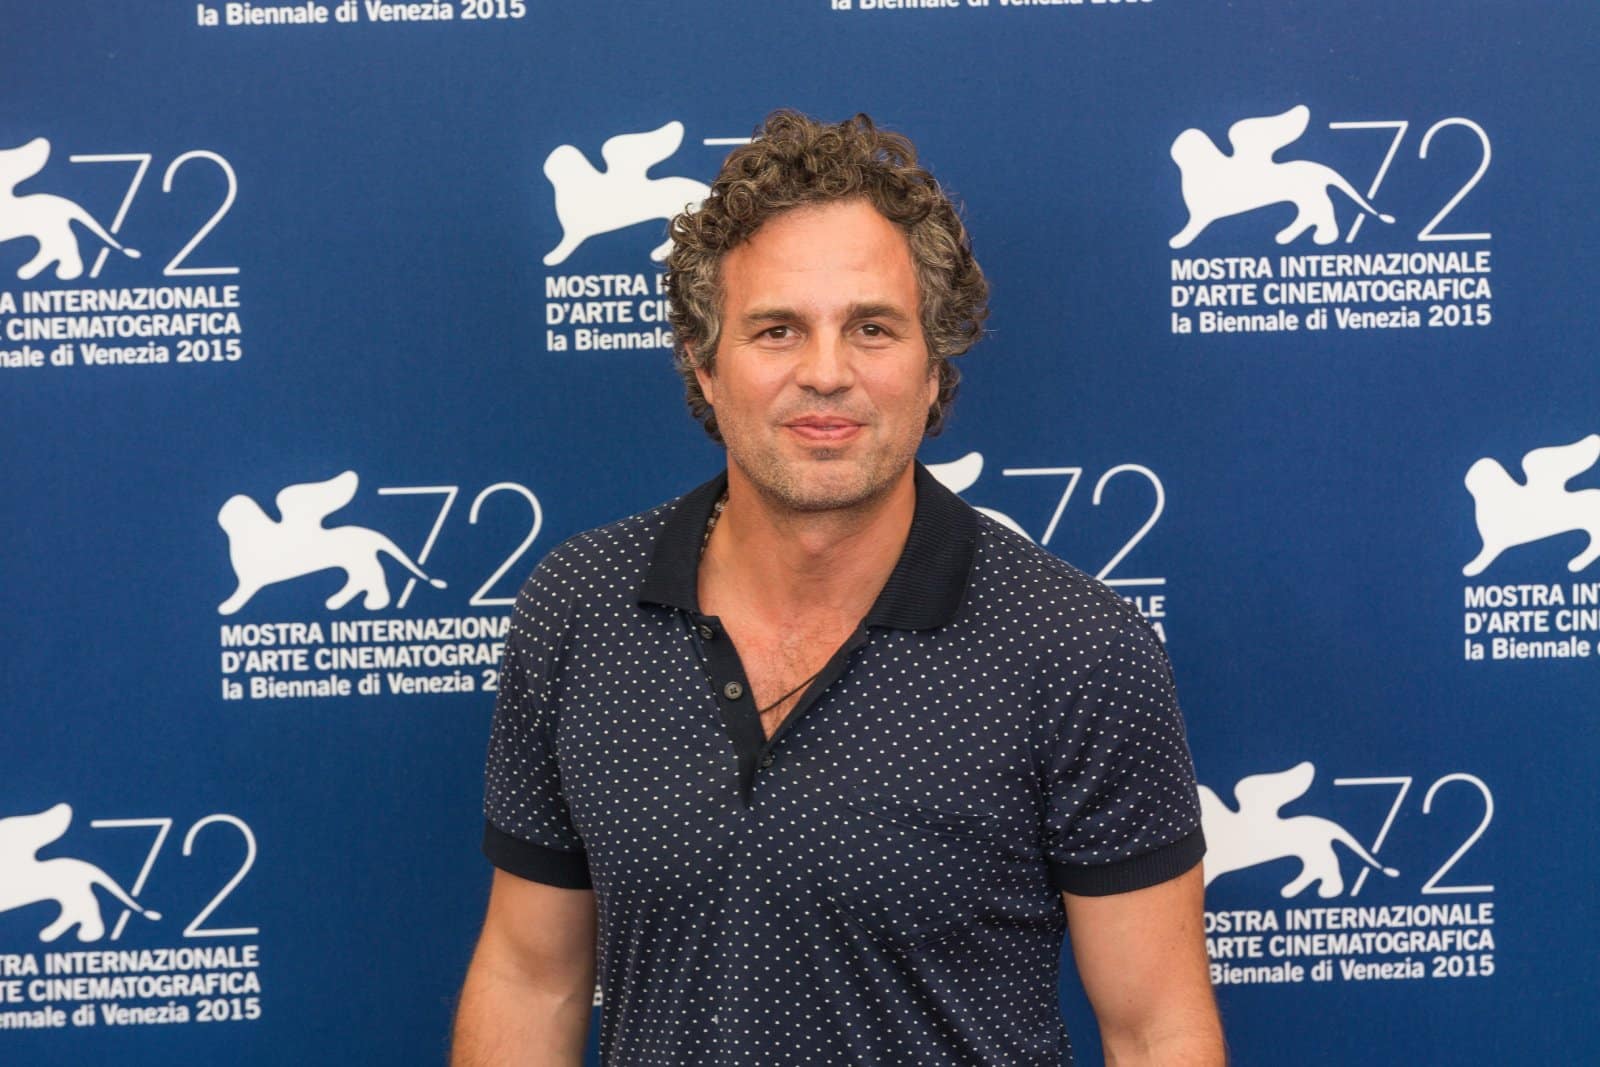 <p><span>Ruffalo has been a vocal advocate for reproductive rights, using his platform to support women’s autonomy over their bodies and challenging legislation that threatens those rights.</span></p>